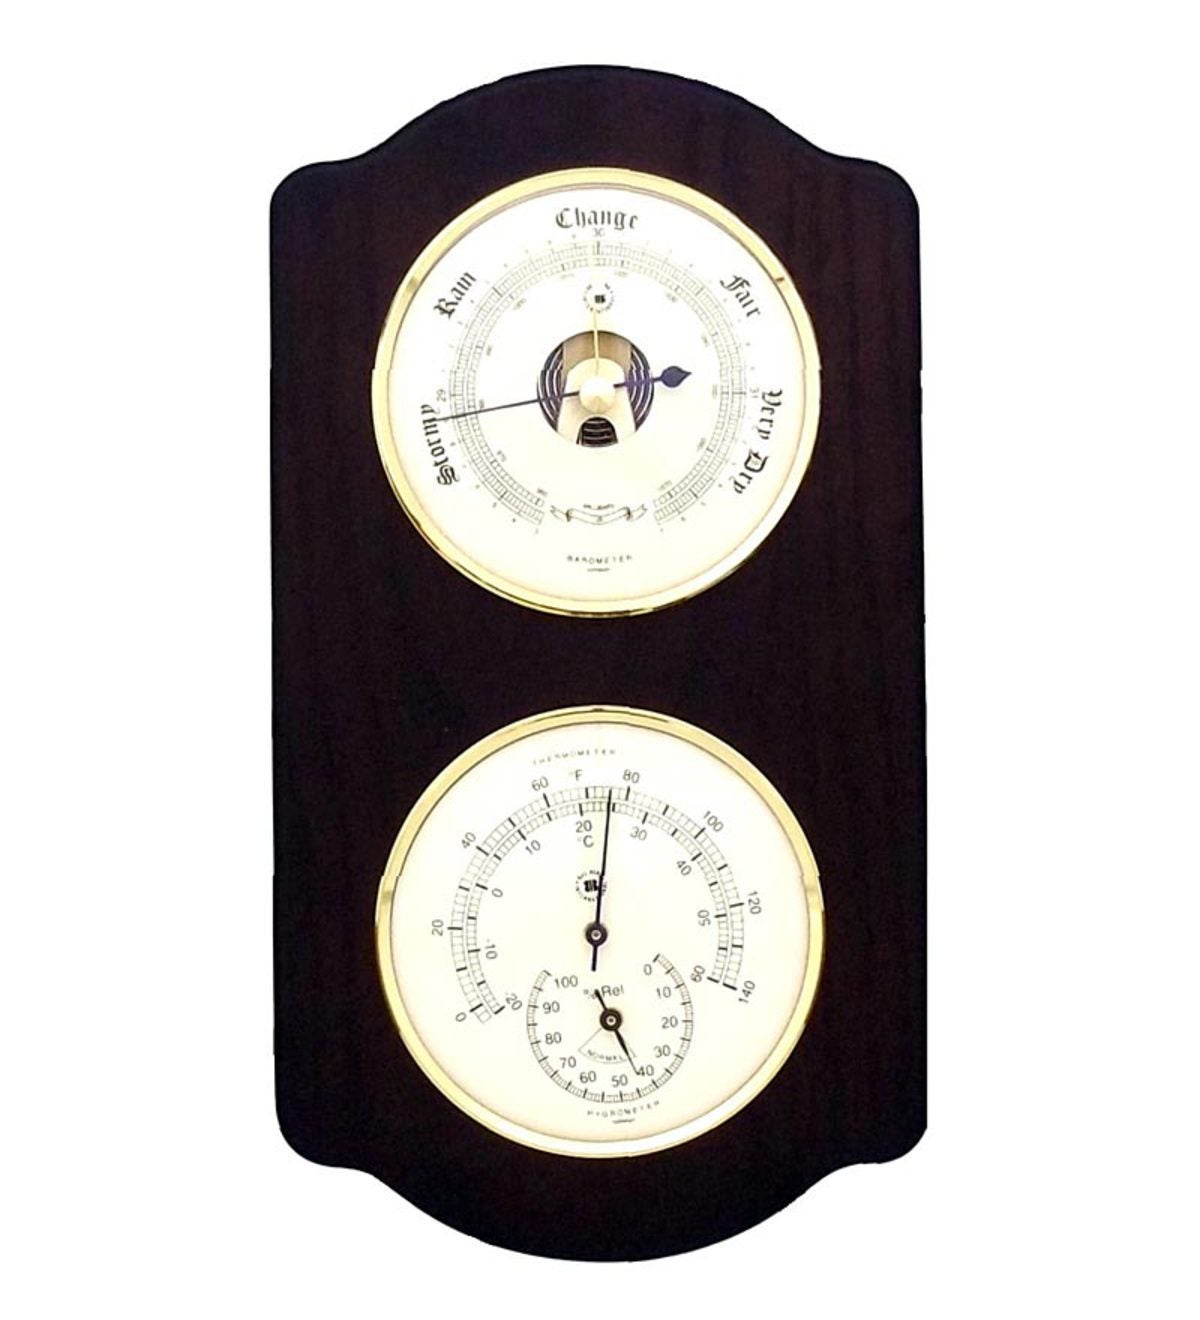 POKHDYE Wall Hanging Barometer Barometers for The Home Brass Weather  Station Barometer Outdoor Barometer Thermometer Hygrometer Wall Mounted  Household